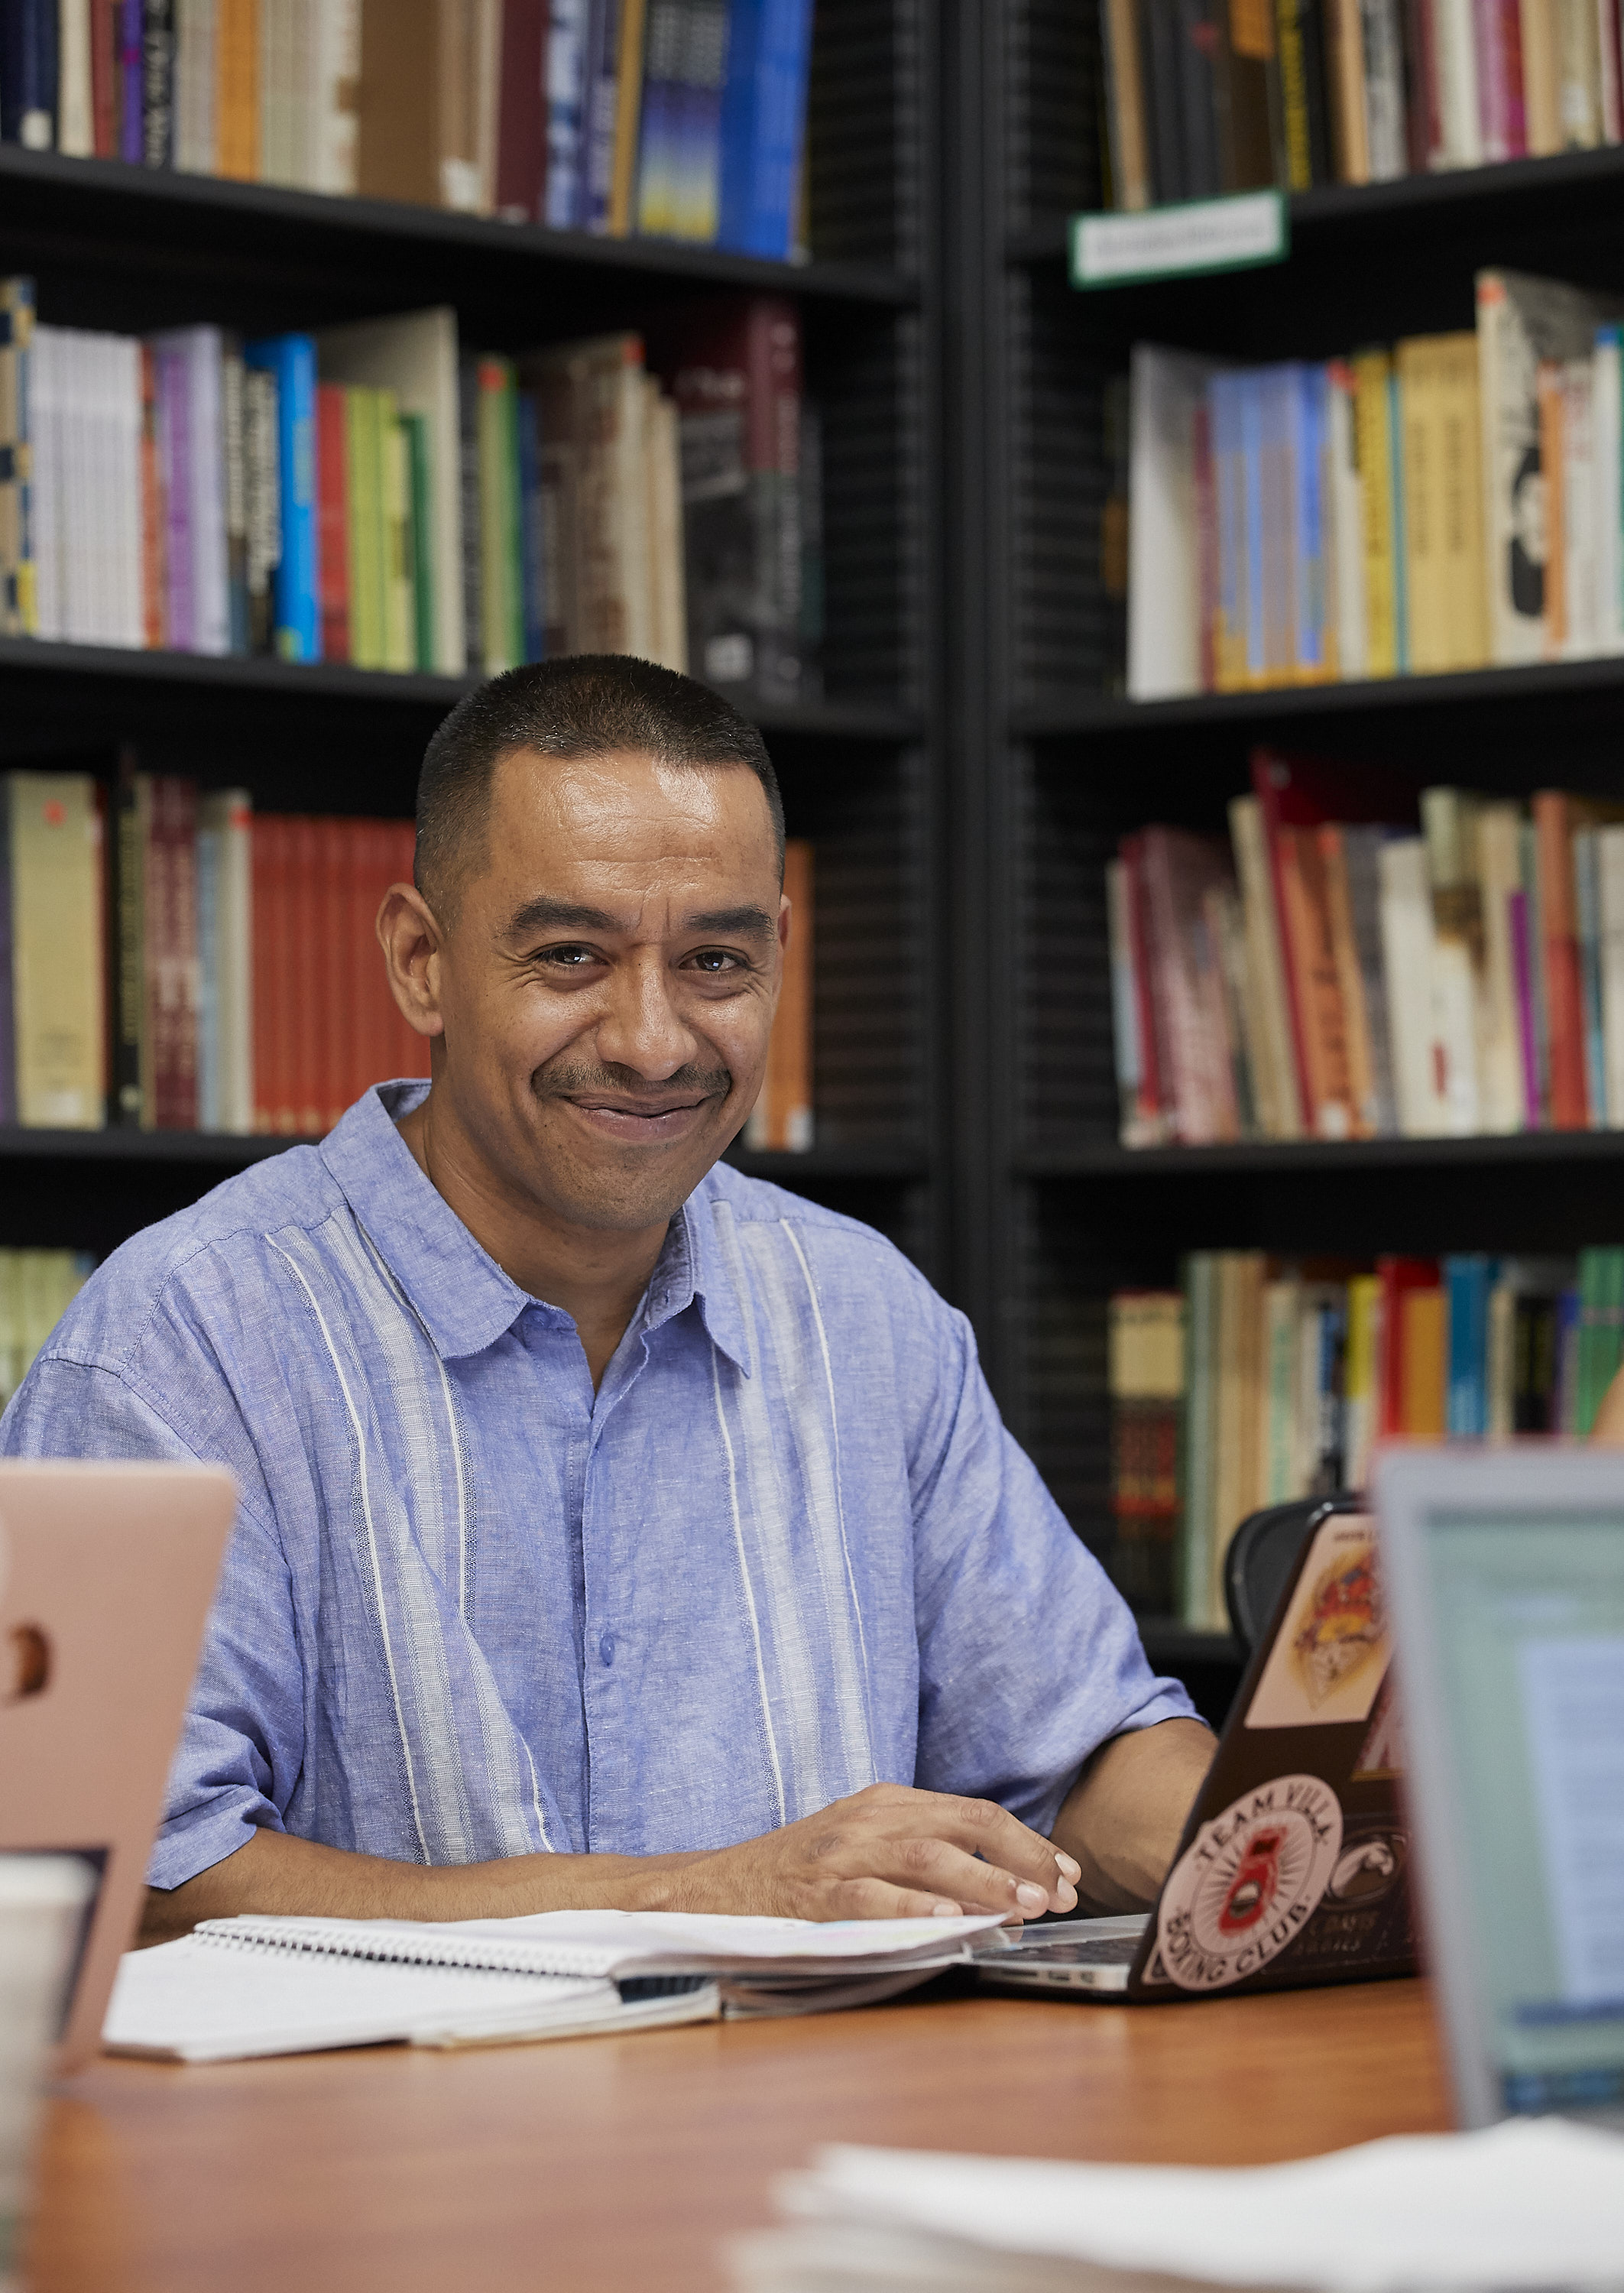 a man smiling with shelves of books behind him 